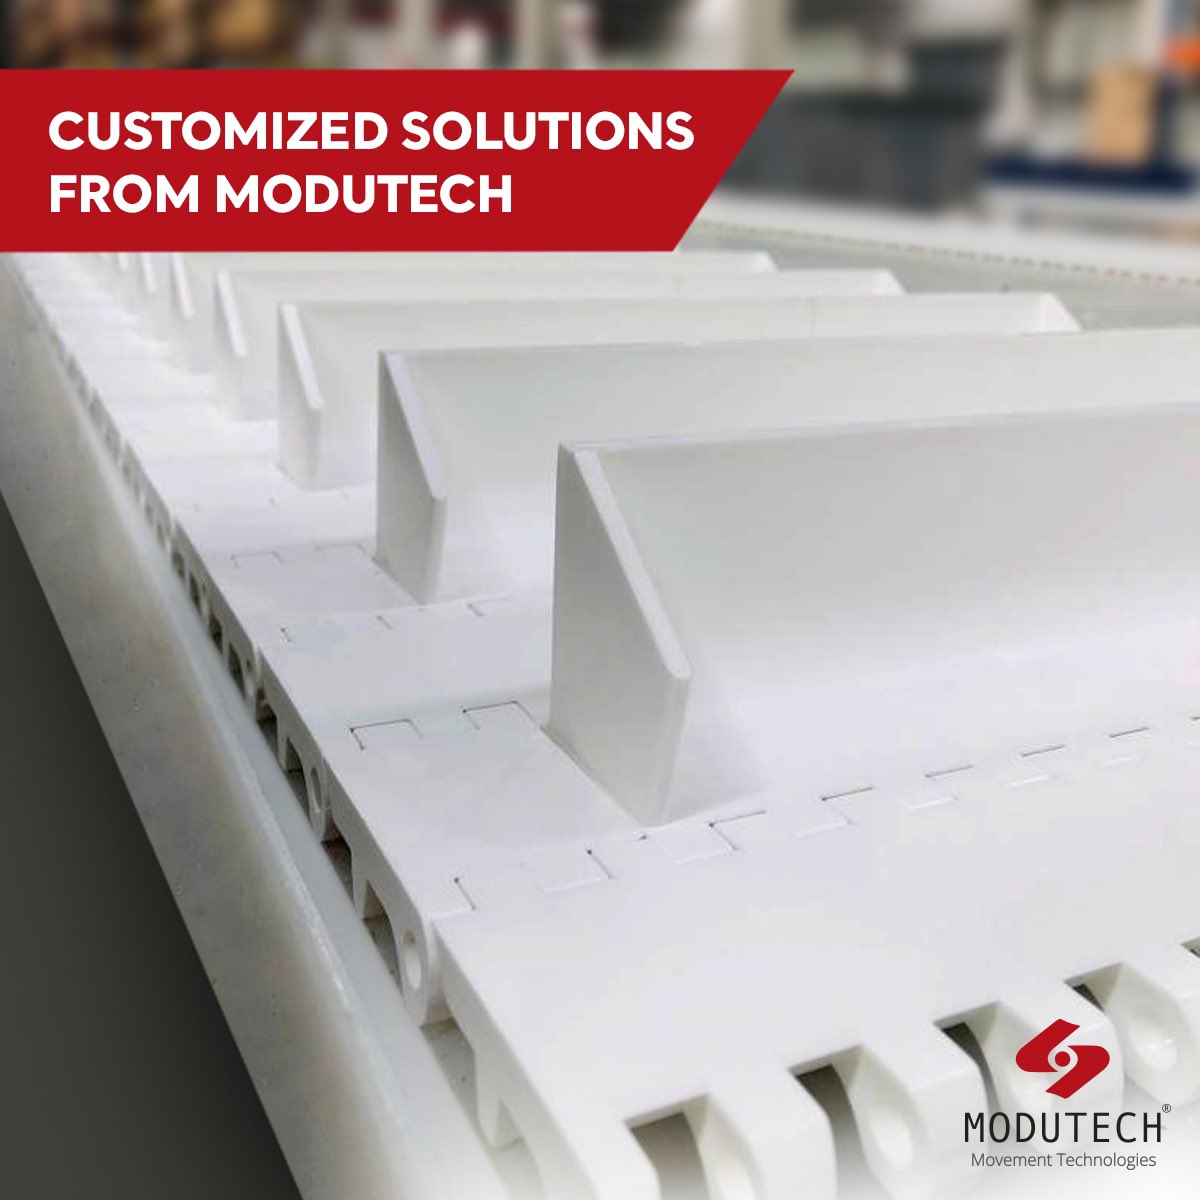 In the world of Modutech, there are customized solutions and special services for you. Modutech offers a variety of flight types based on each application.

#modutech #modularbelting #belt #foodbelts #foodindustry #modularbelts #movementtechnologies #foodapplications #innovation